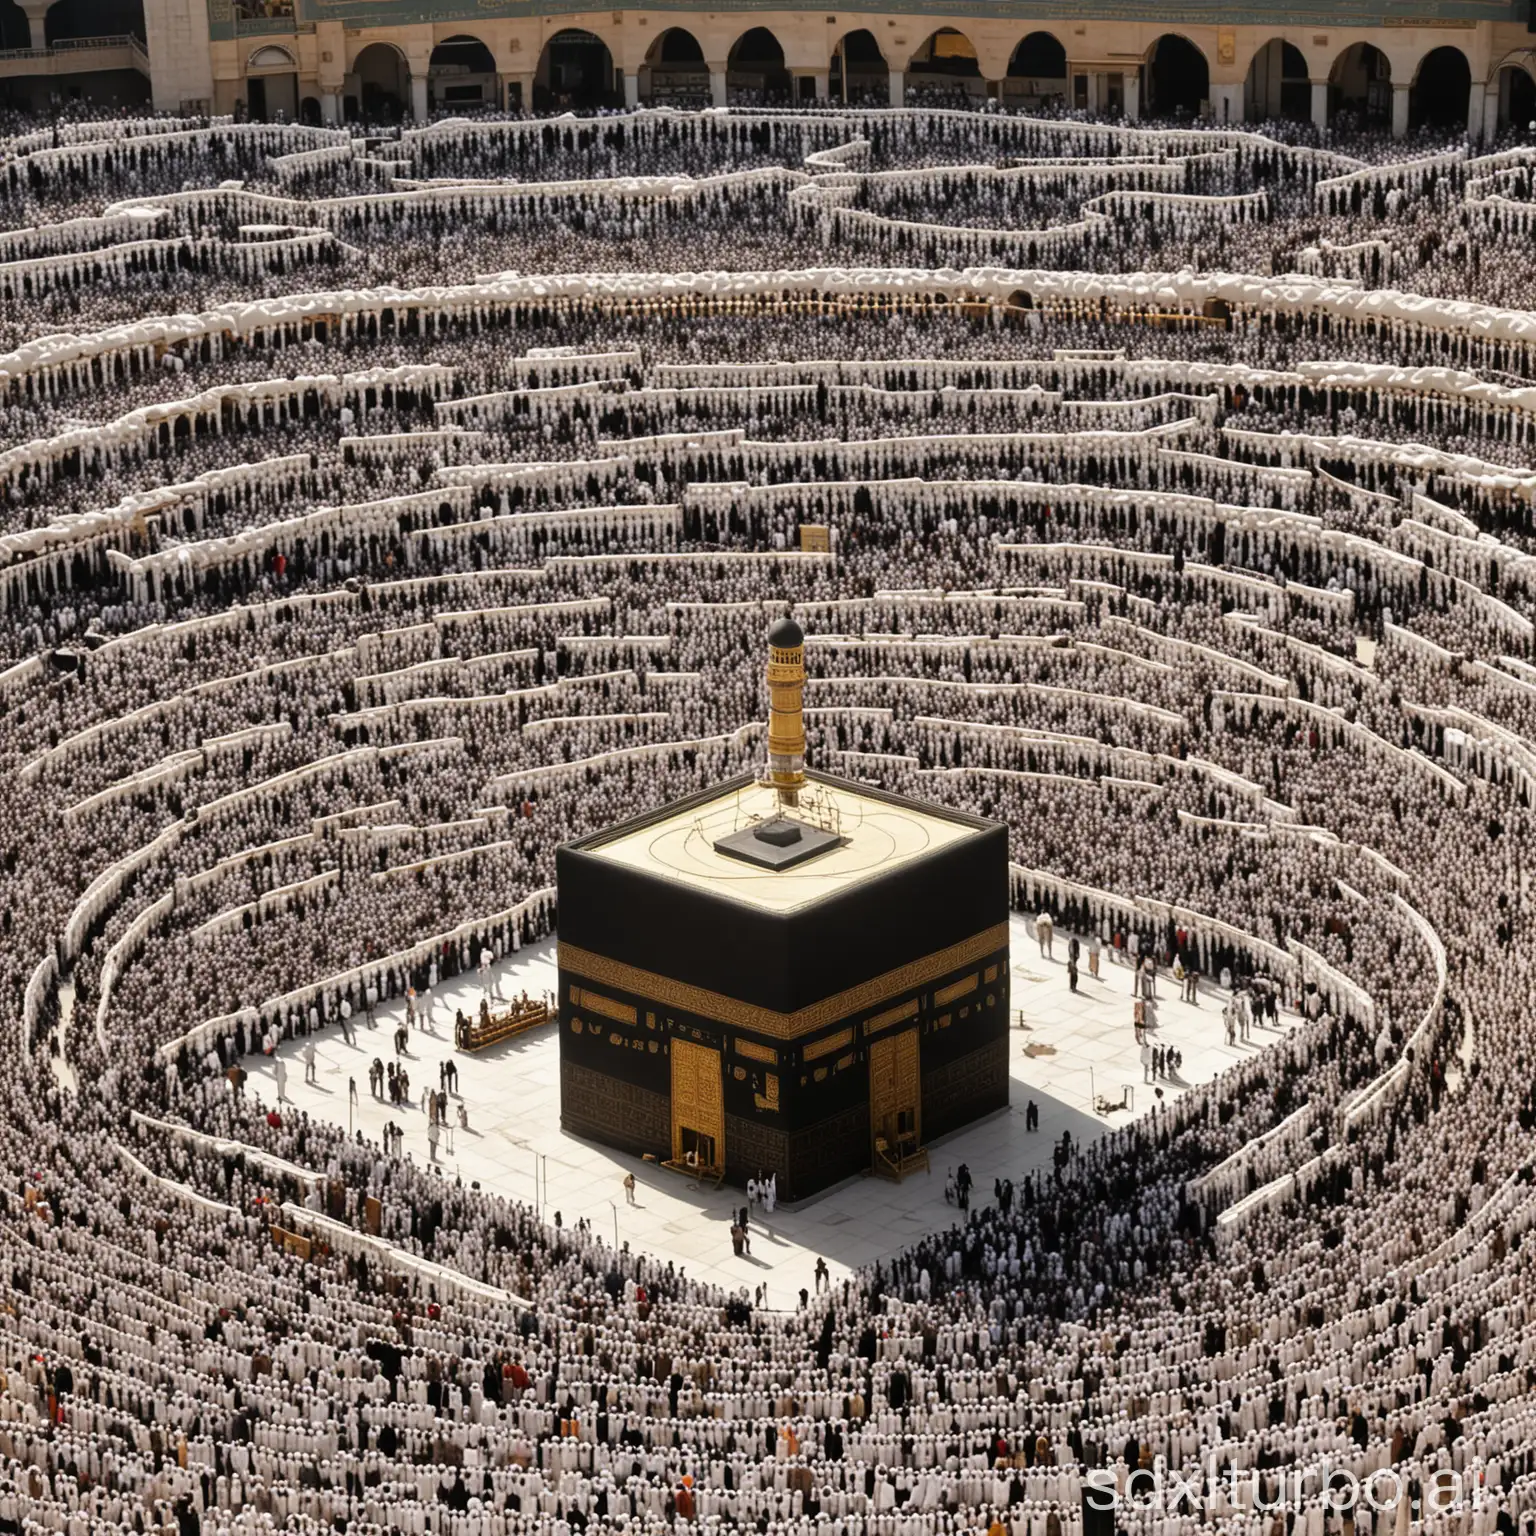 Picture of the Kaaba